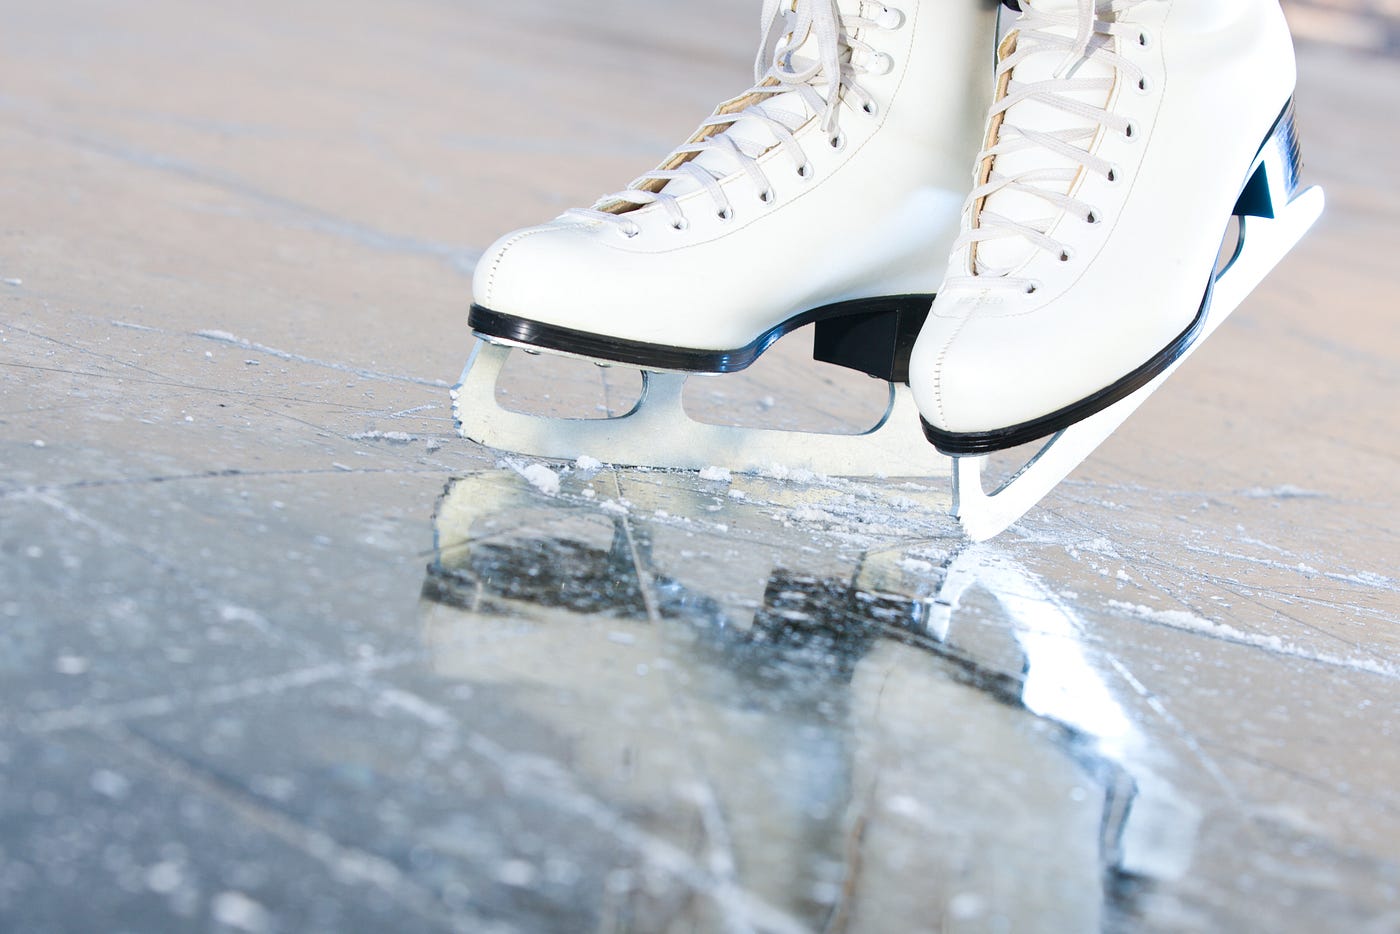 Learning to Ice Skate as an Adult Has Brought Me the Biggest Joy by Alla Umanskiy Modern Parent Medium picture